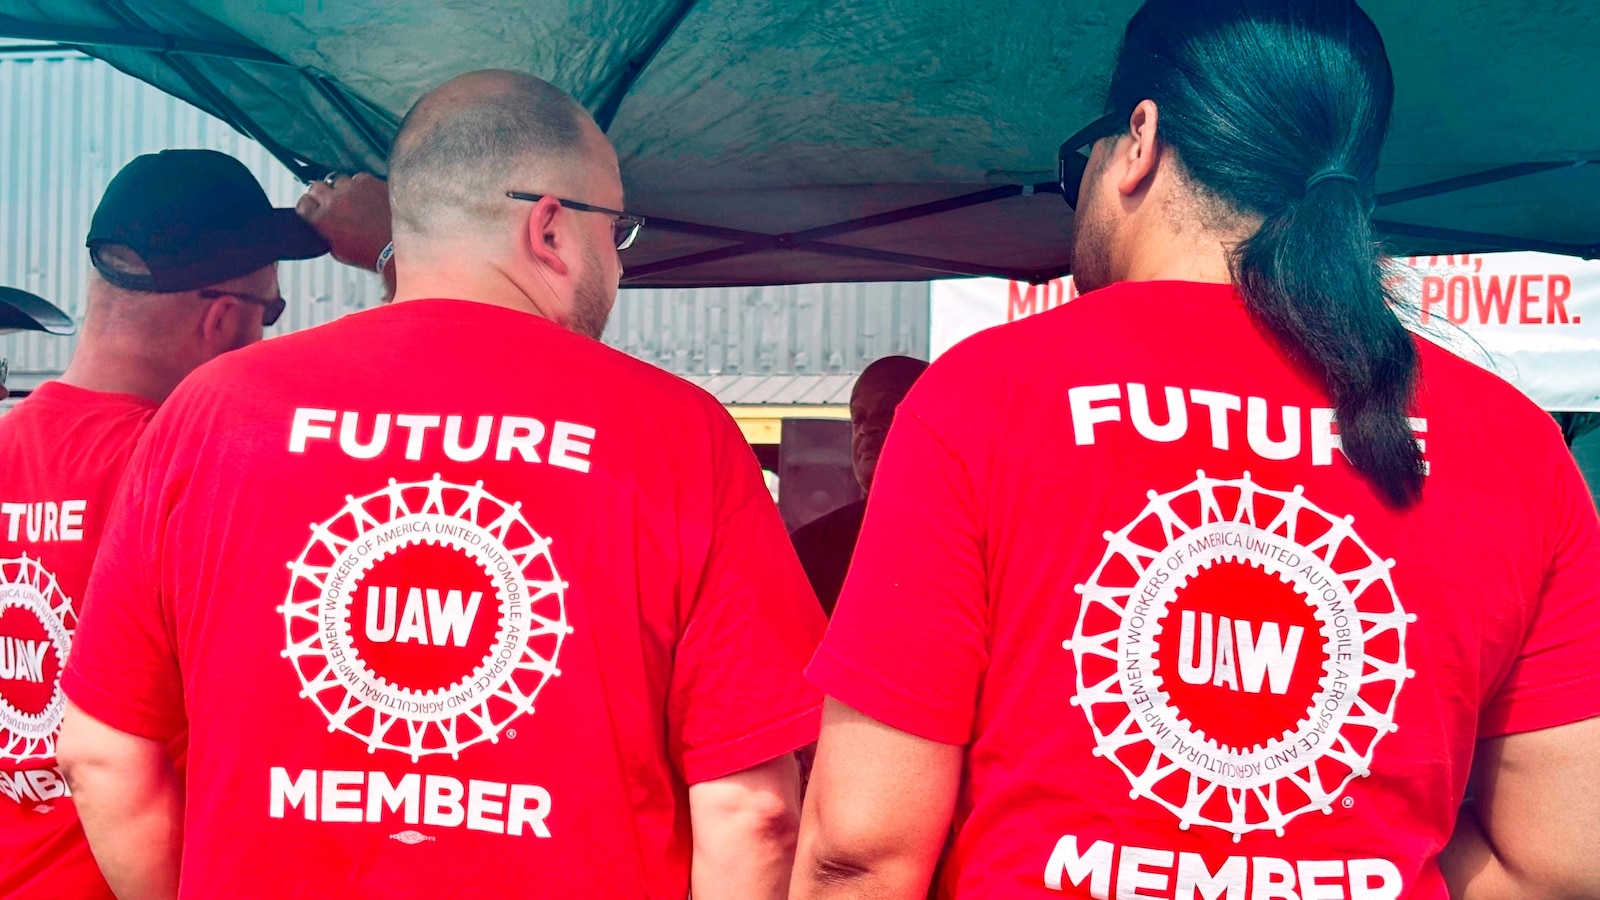 Mercedes-Benz workers in Alabama are voting to join the UAW. Here's what's at stake.